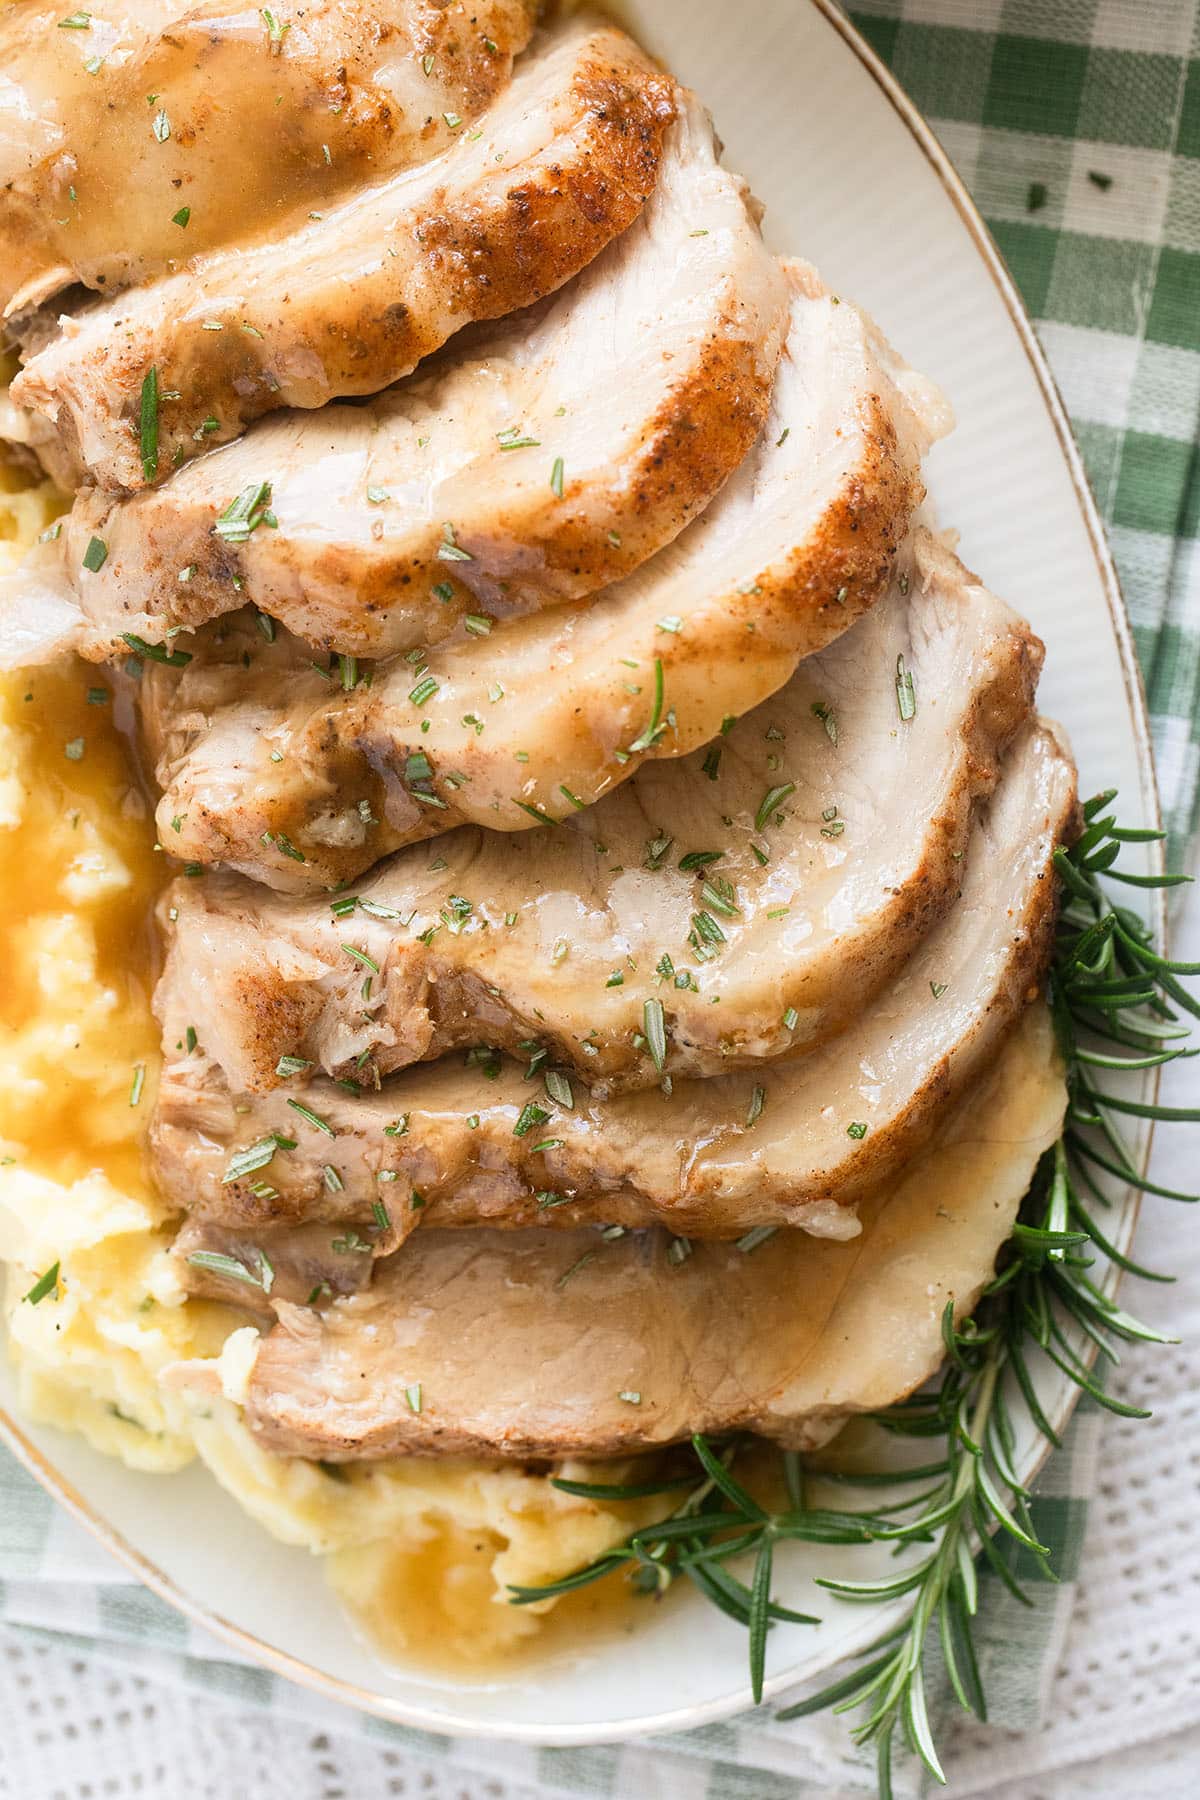 sliced pork loin with mashed potatoes and rosemary sprigs on a platter.